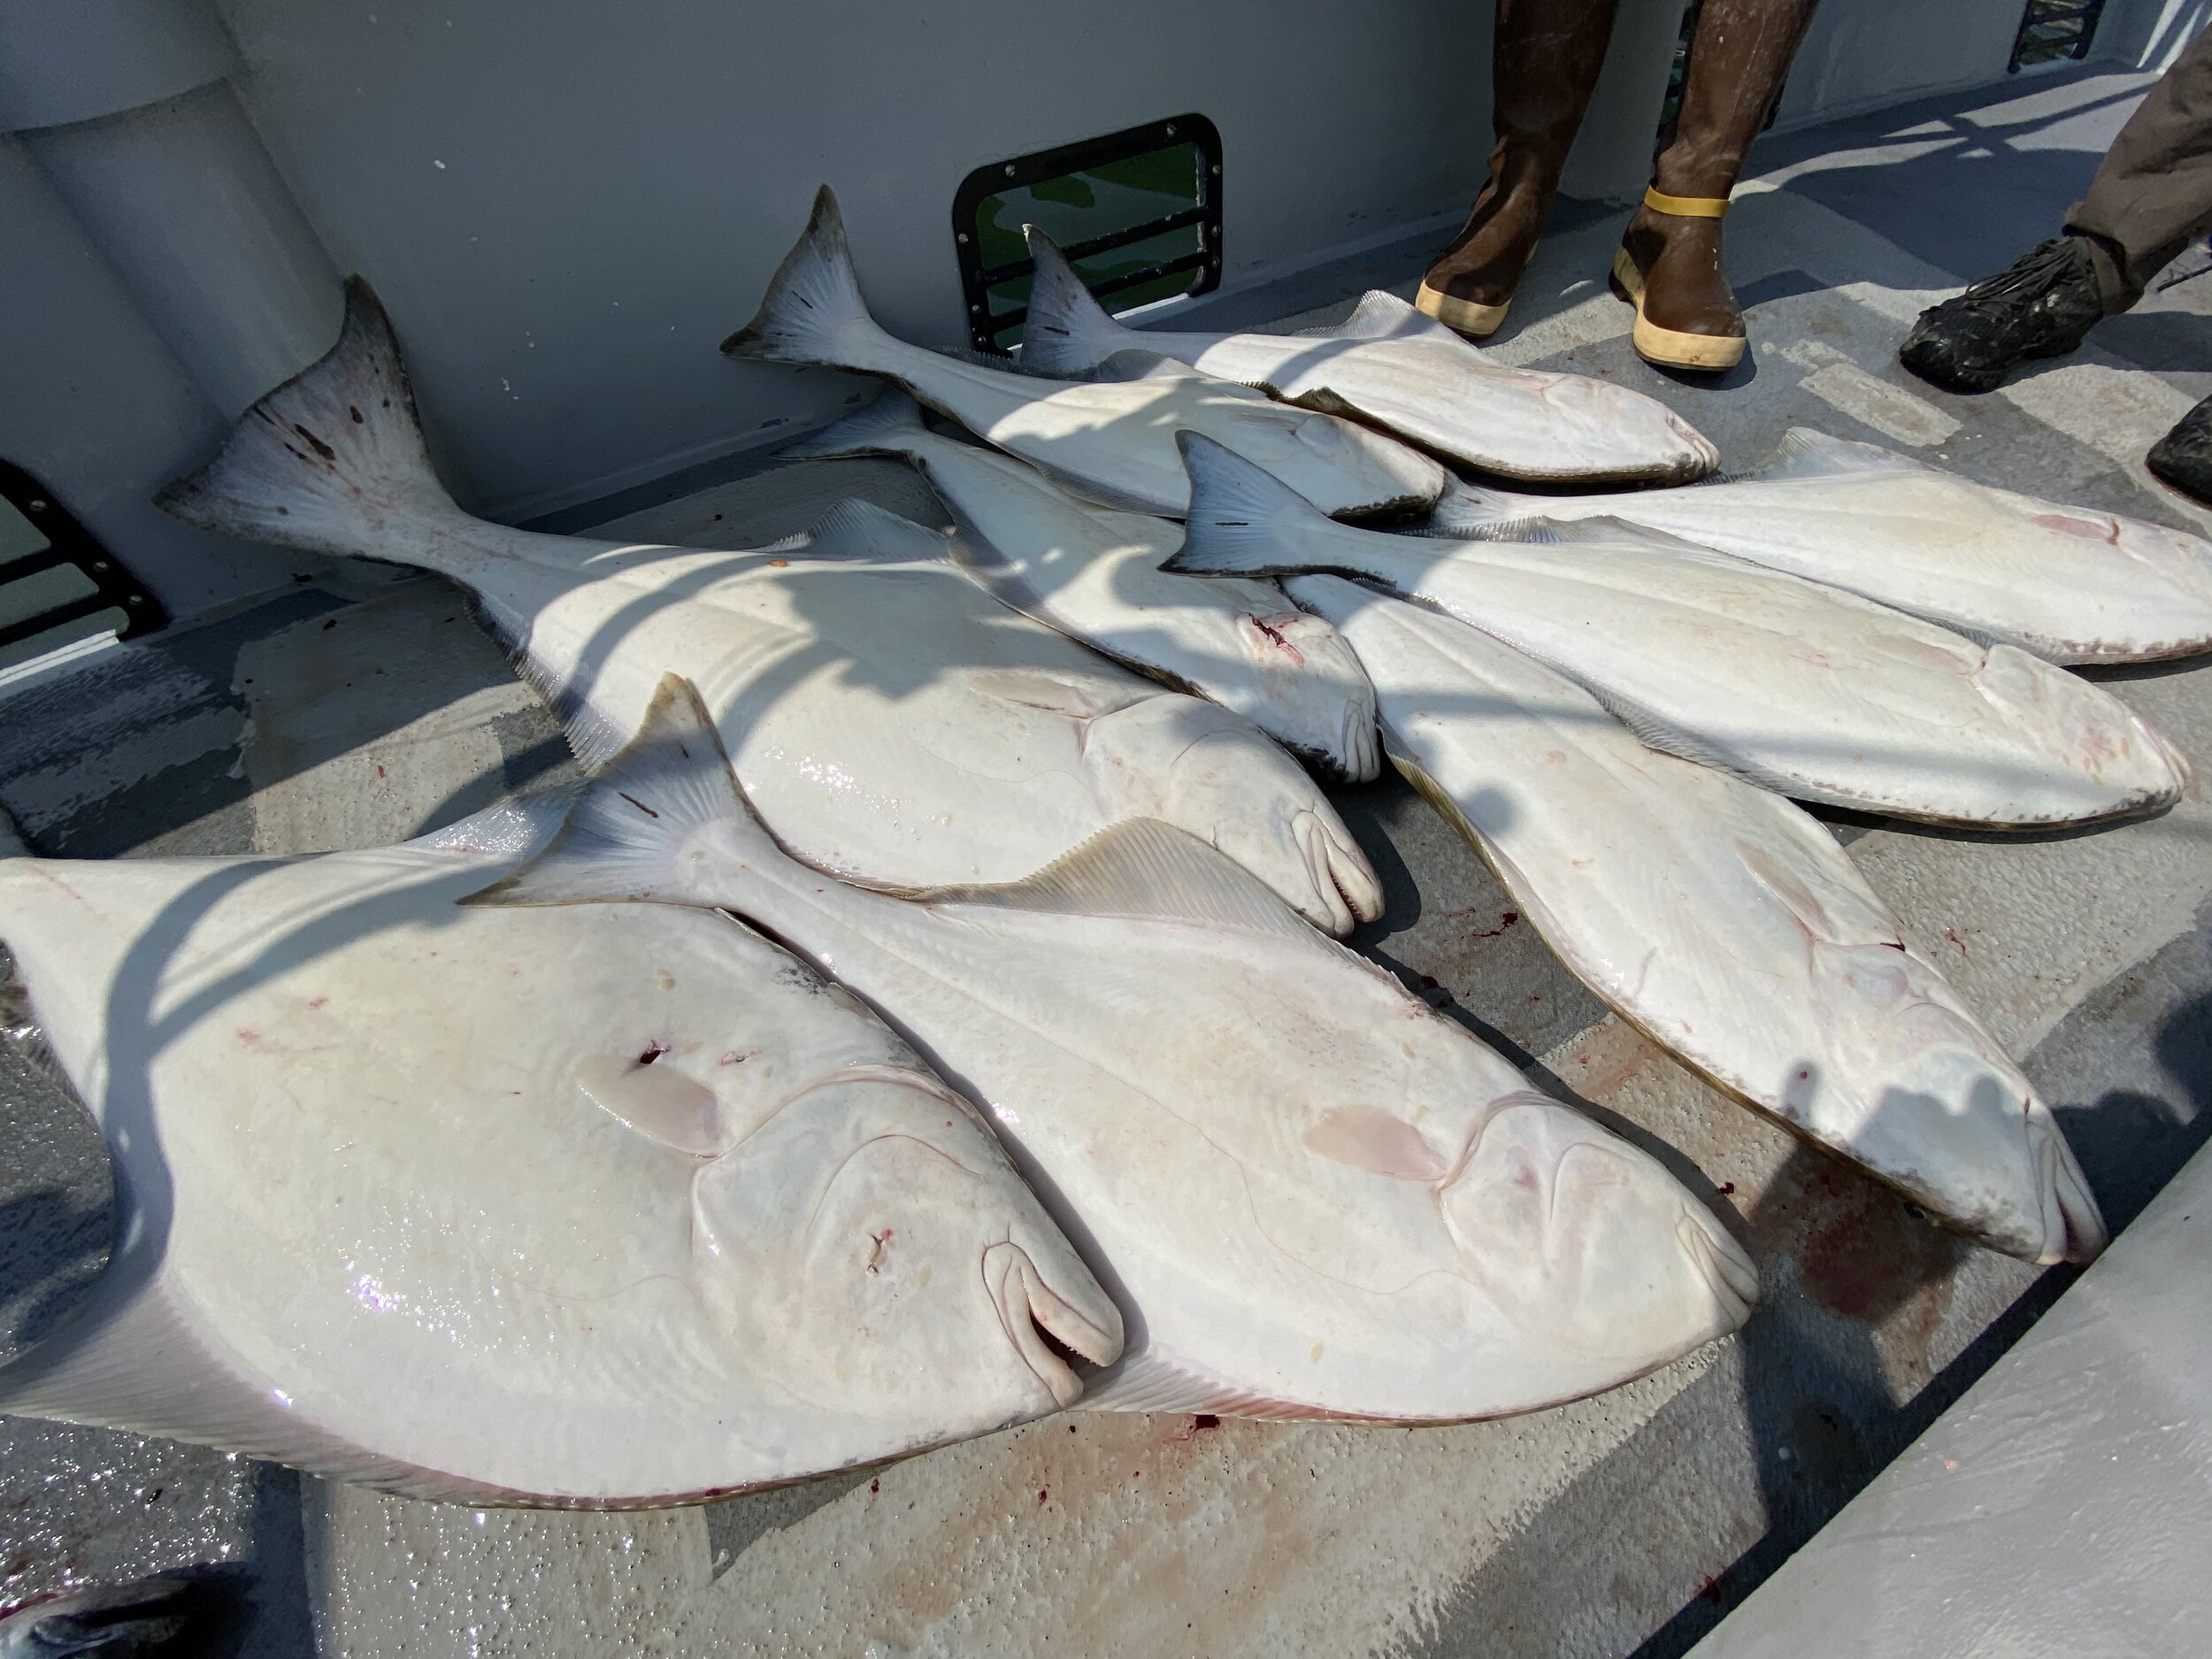   Fish for halibut with Kodiak Marine Charters in Kodiak, AK   Book your full day or private charter and spend a day on the water catching salmon, halibut, rock fish and ling cod! 